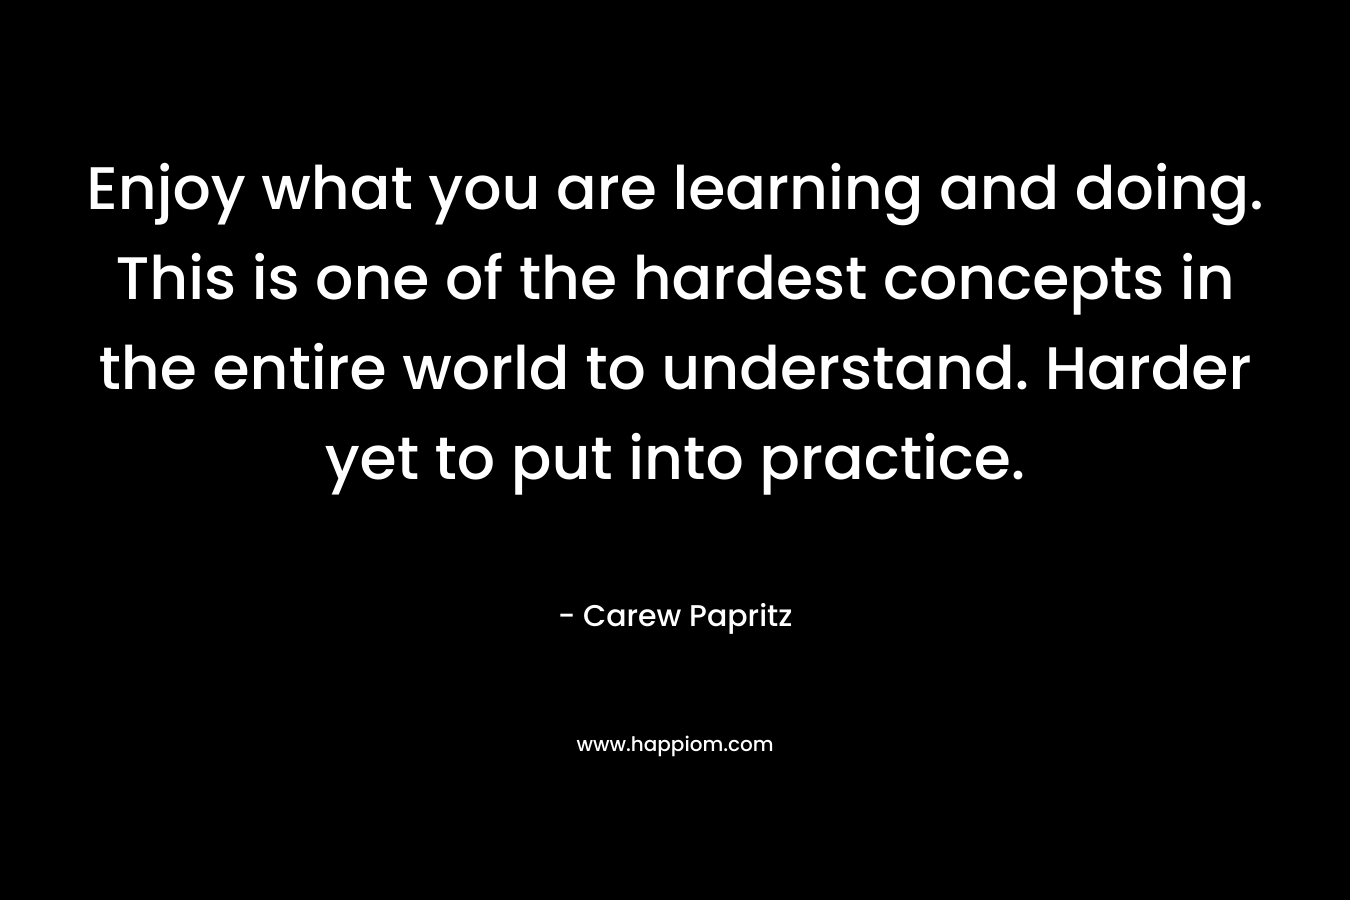 Enjoy what you are learning and doing. This is one of the hardest concepts in the entire world to understand. Harder yet to put into practice. – Carew Papritz